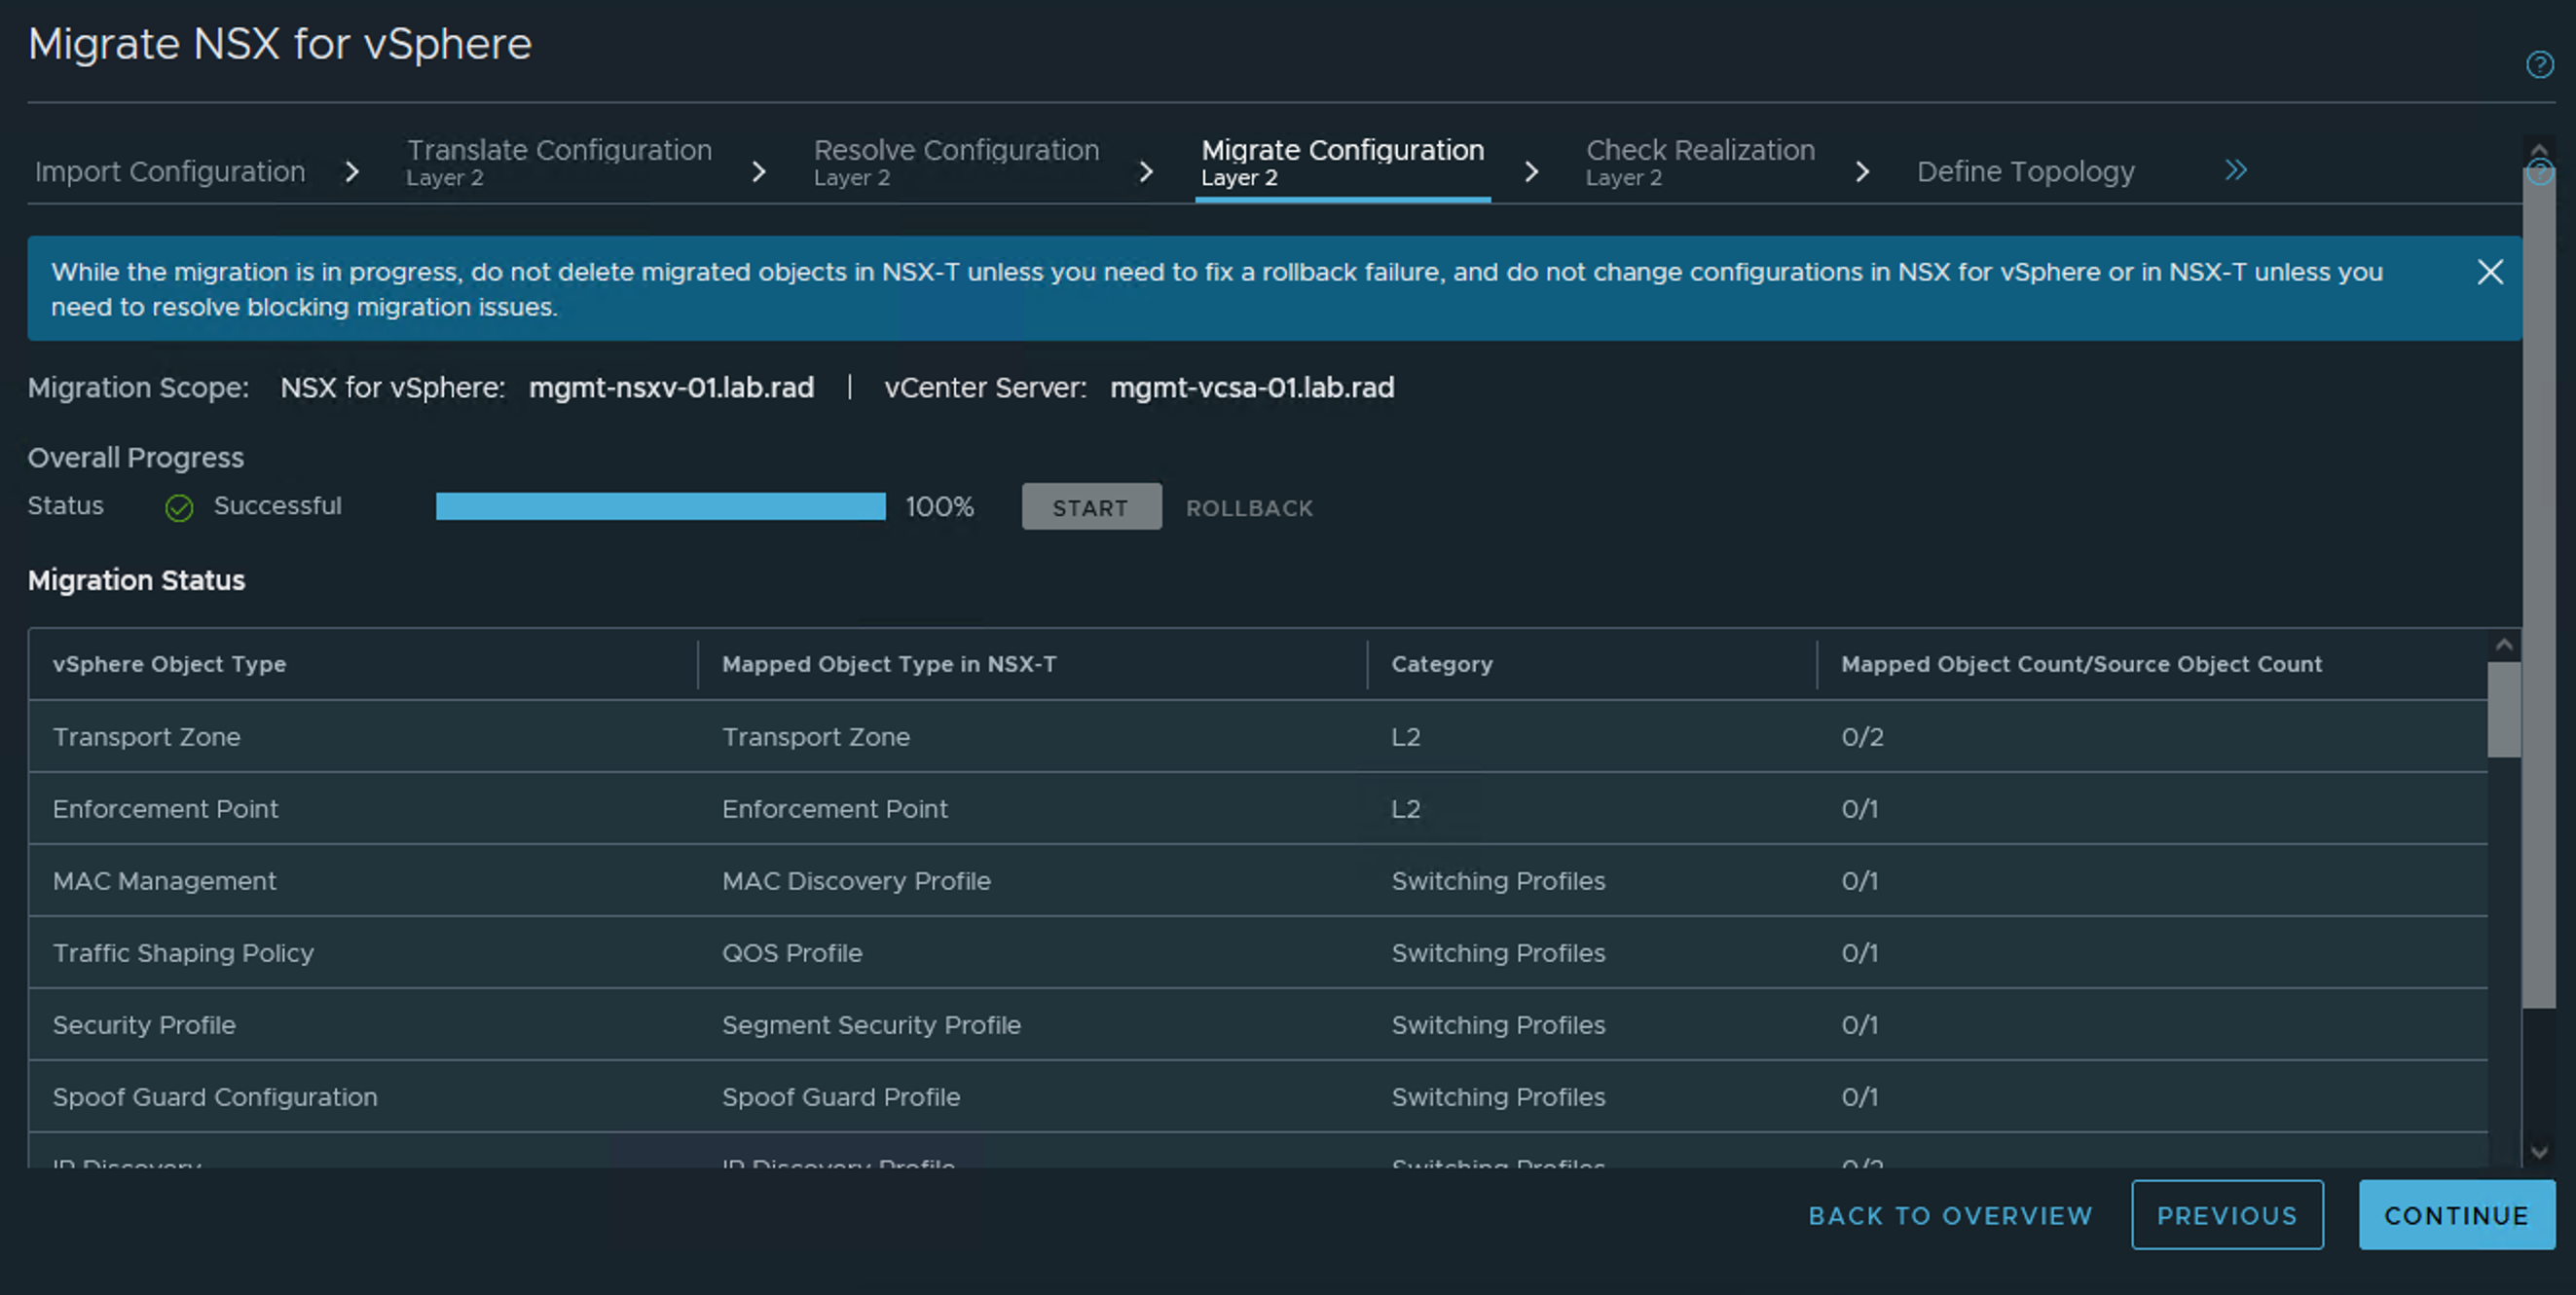 Screenshot of the migrate configuration layer 2 screen